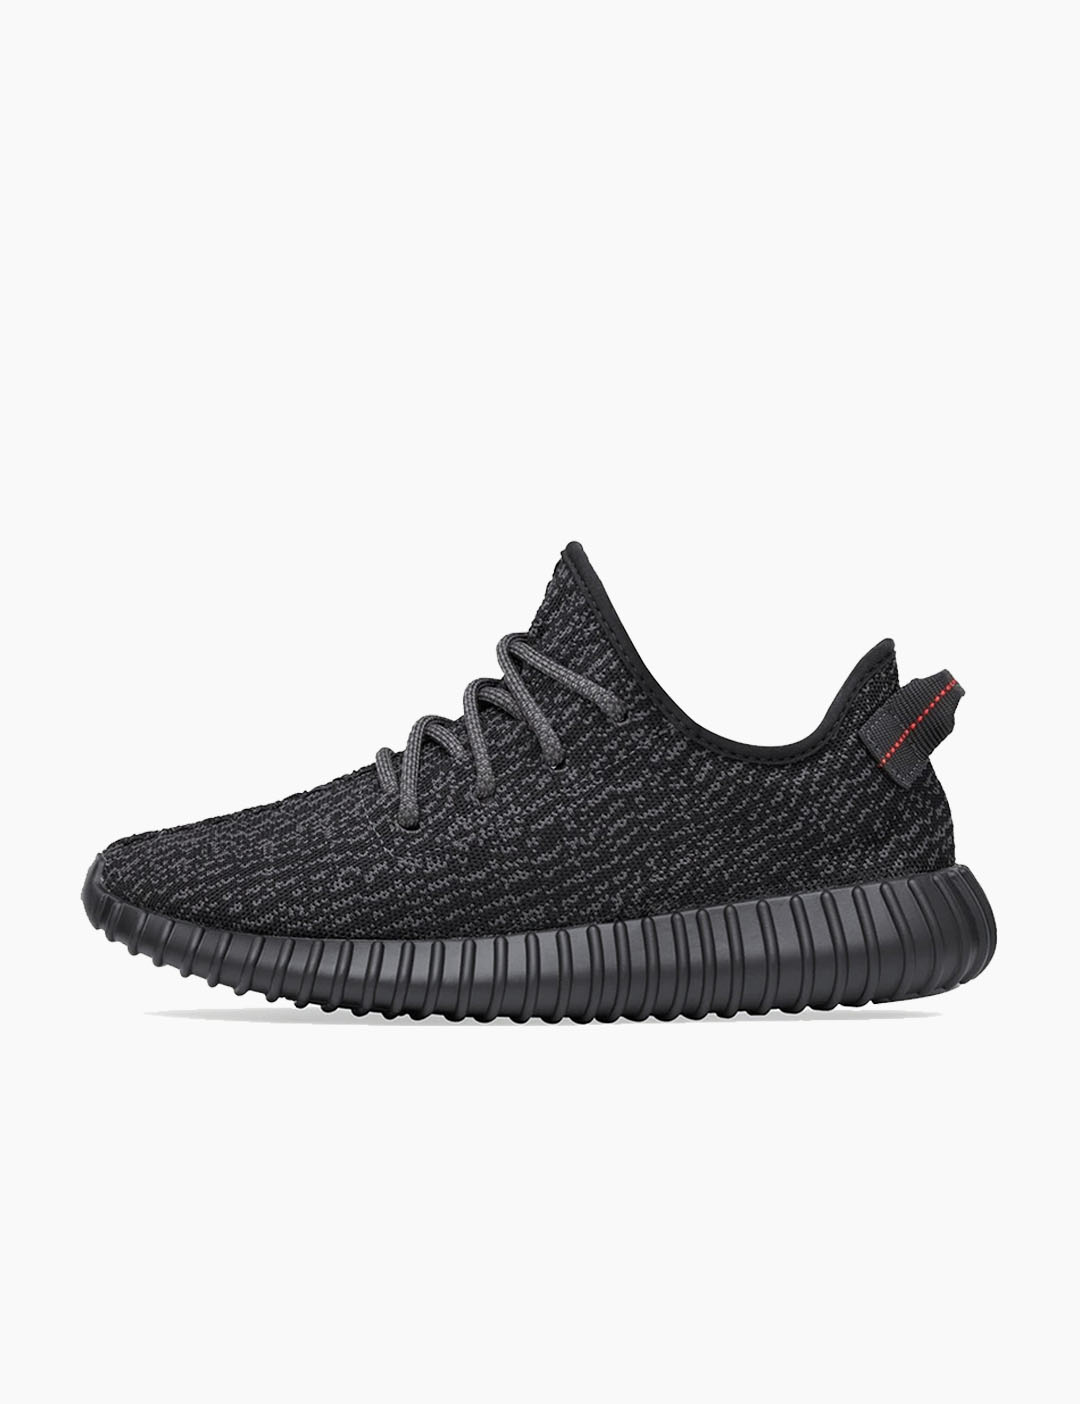 adidas YEEZY BOOST "Pirate Release | Drops | Hypebeast